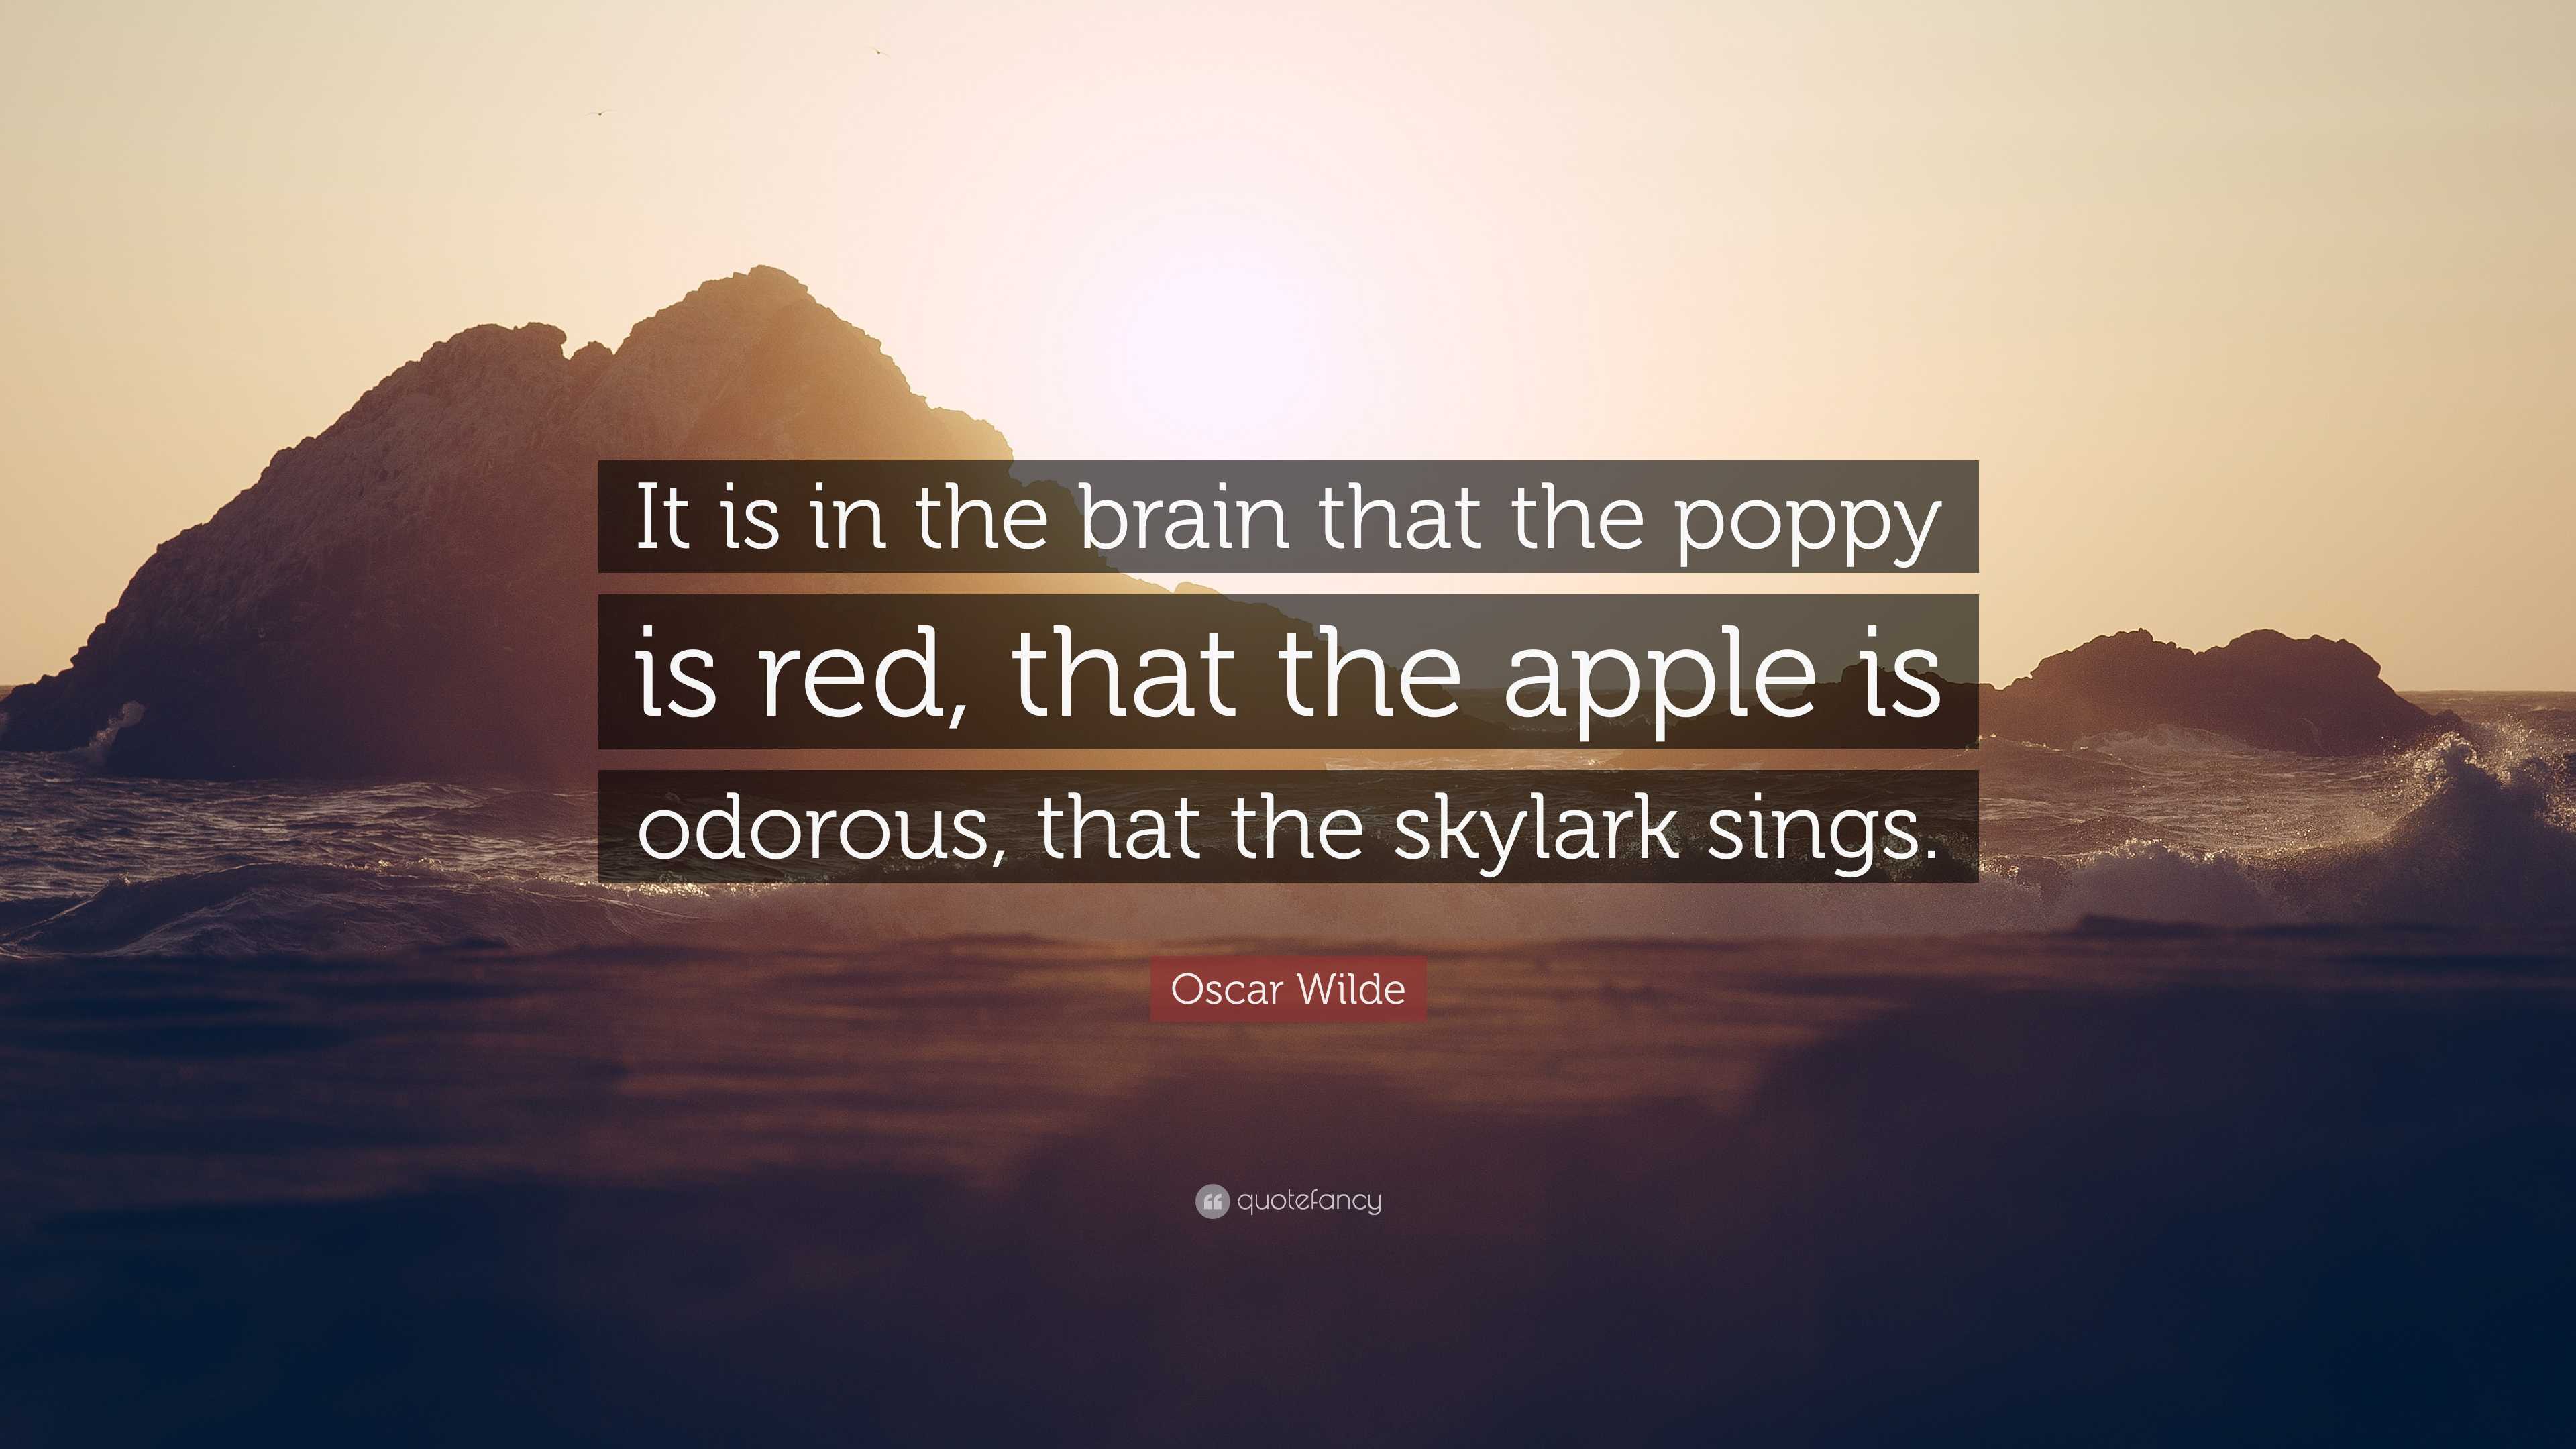 Oscar Wilde Quote: “It is in the brain that the poppy is red, that the apple